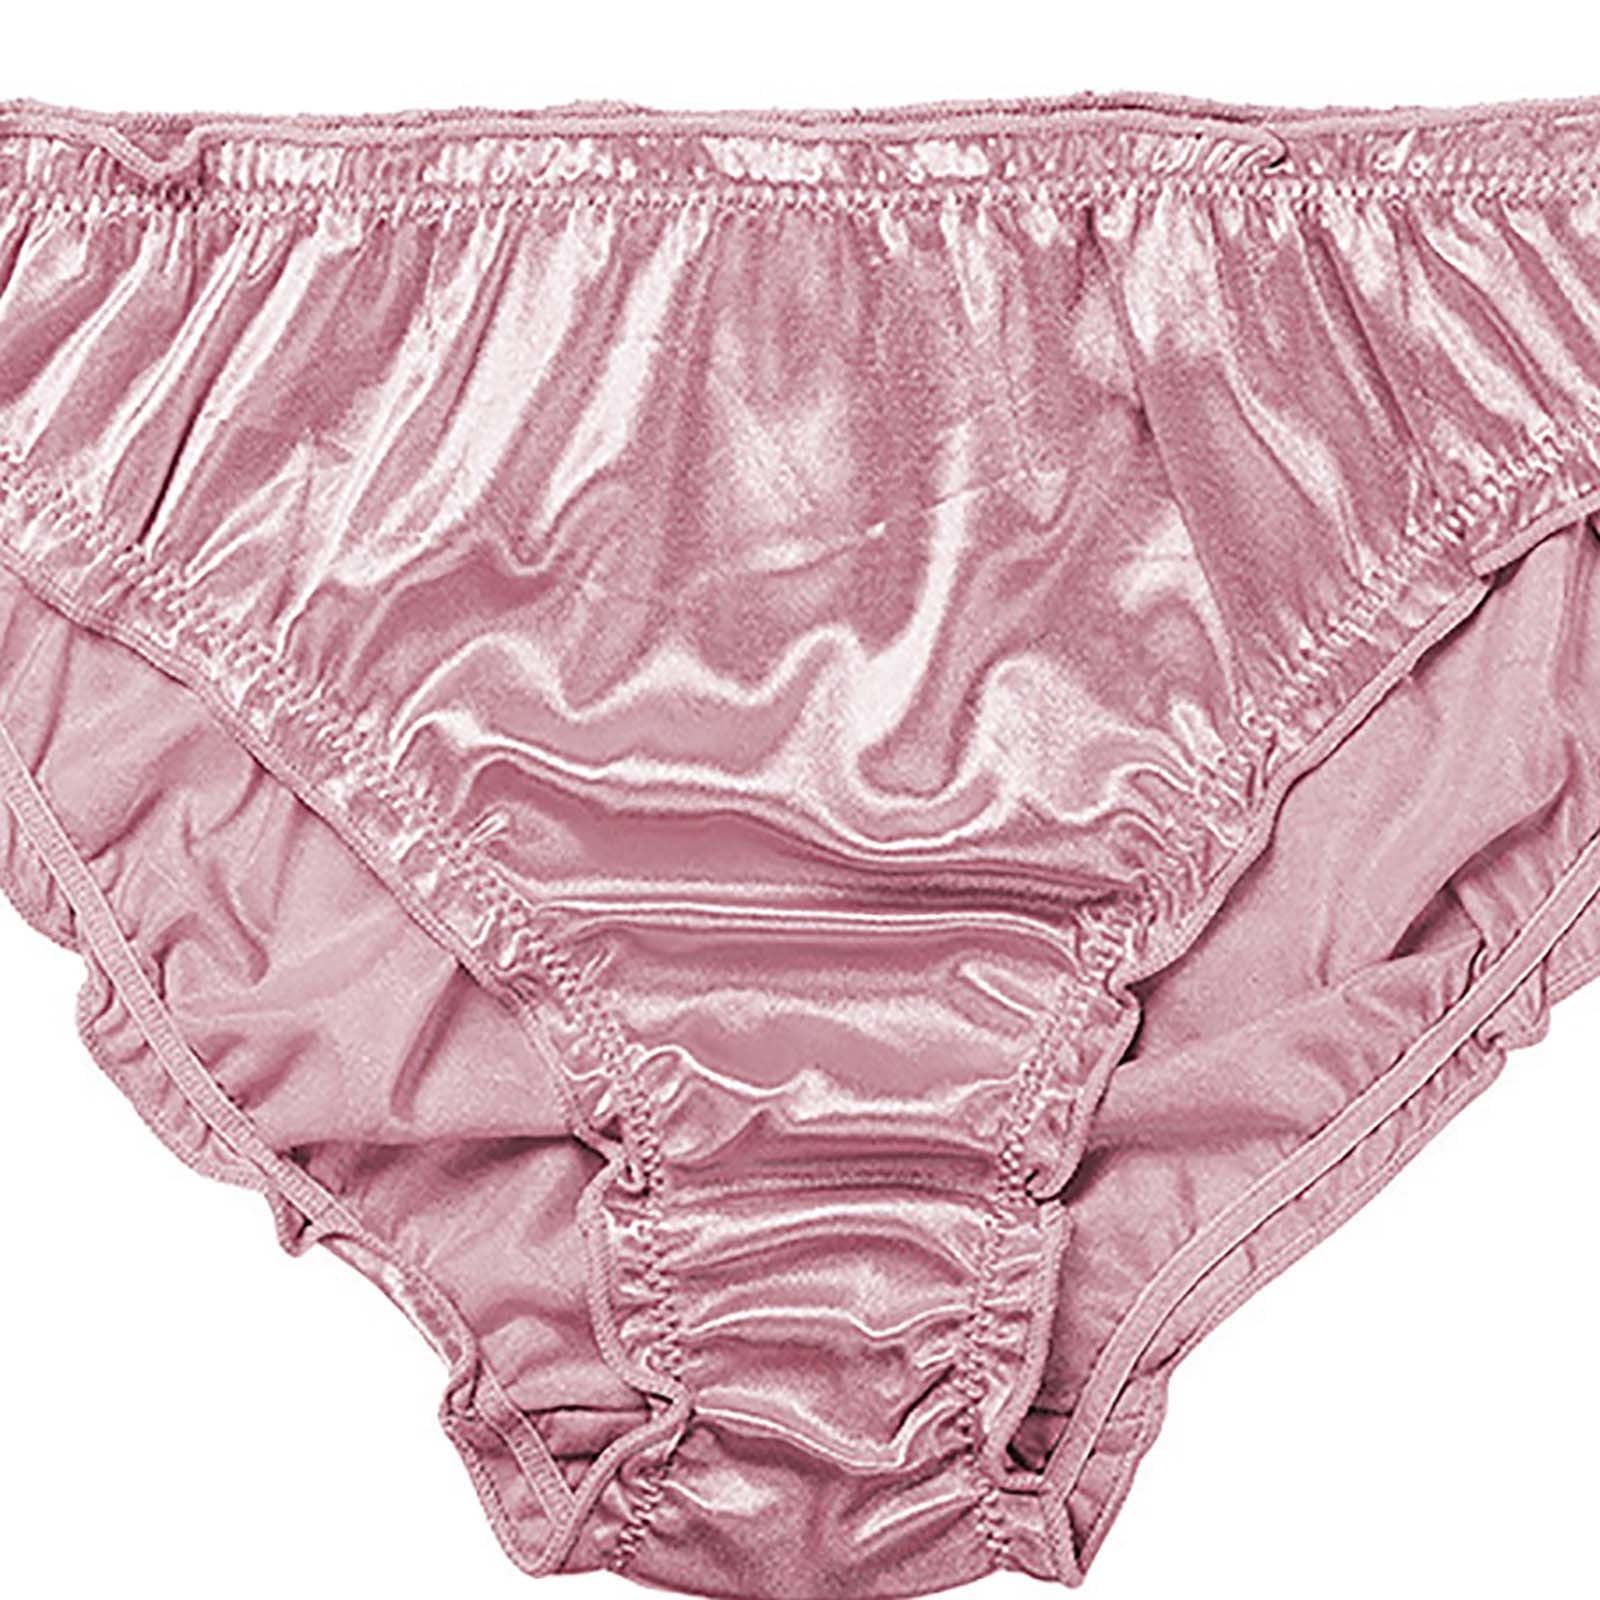 smooth pink satin panties (vertical video) / my underwear collection 